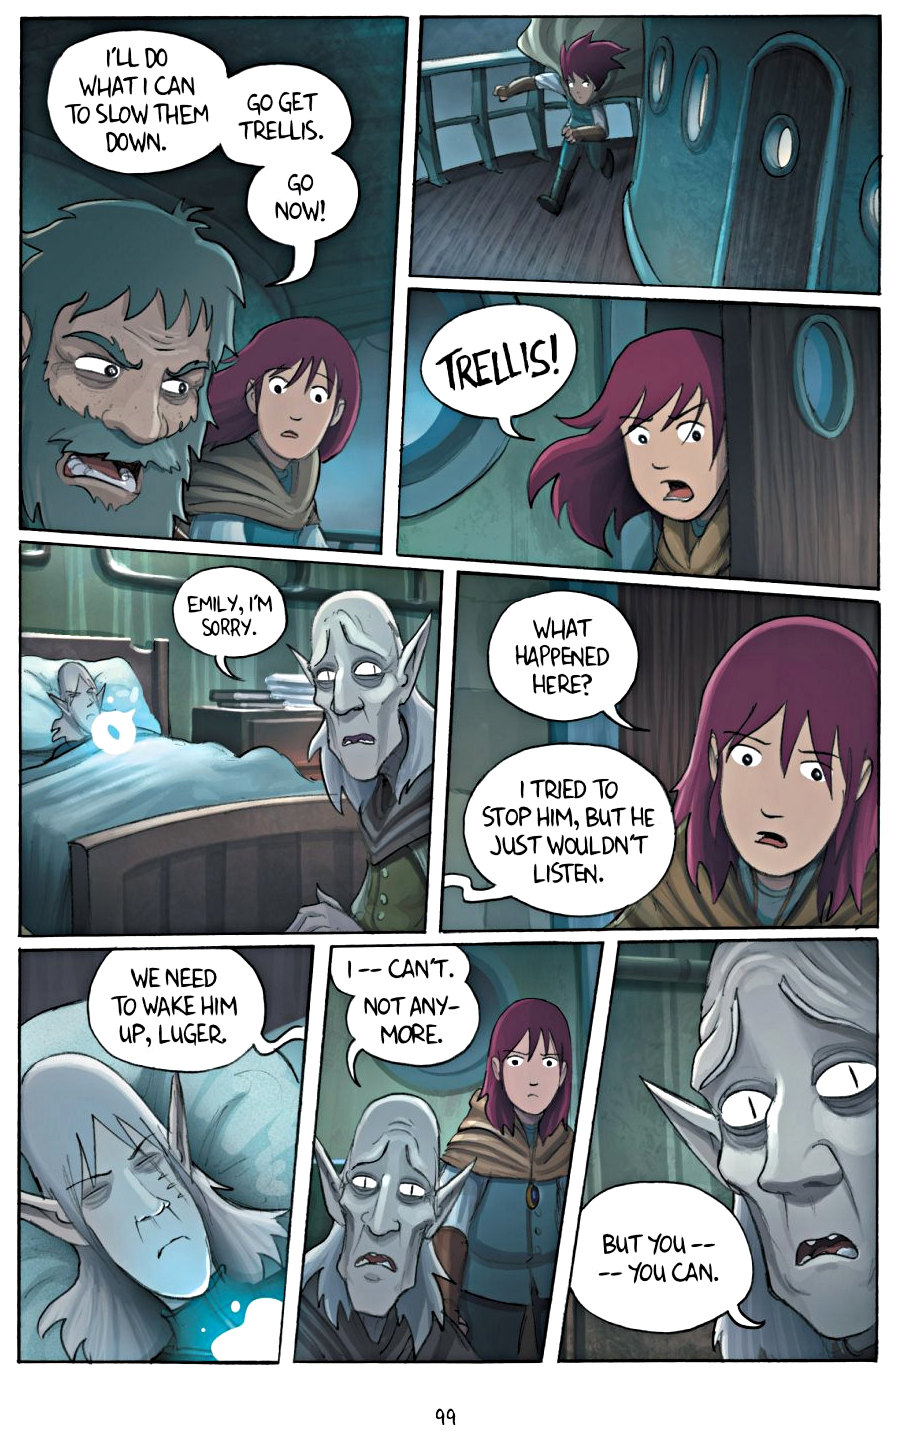 page 99 of amulet 5 prince of the elves graphic novel